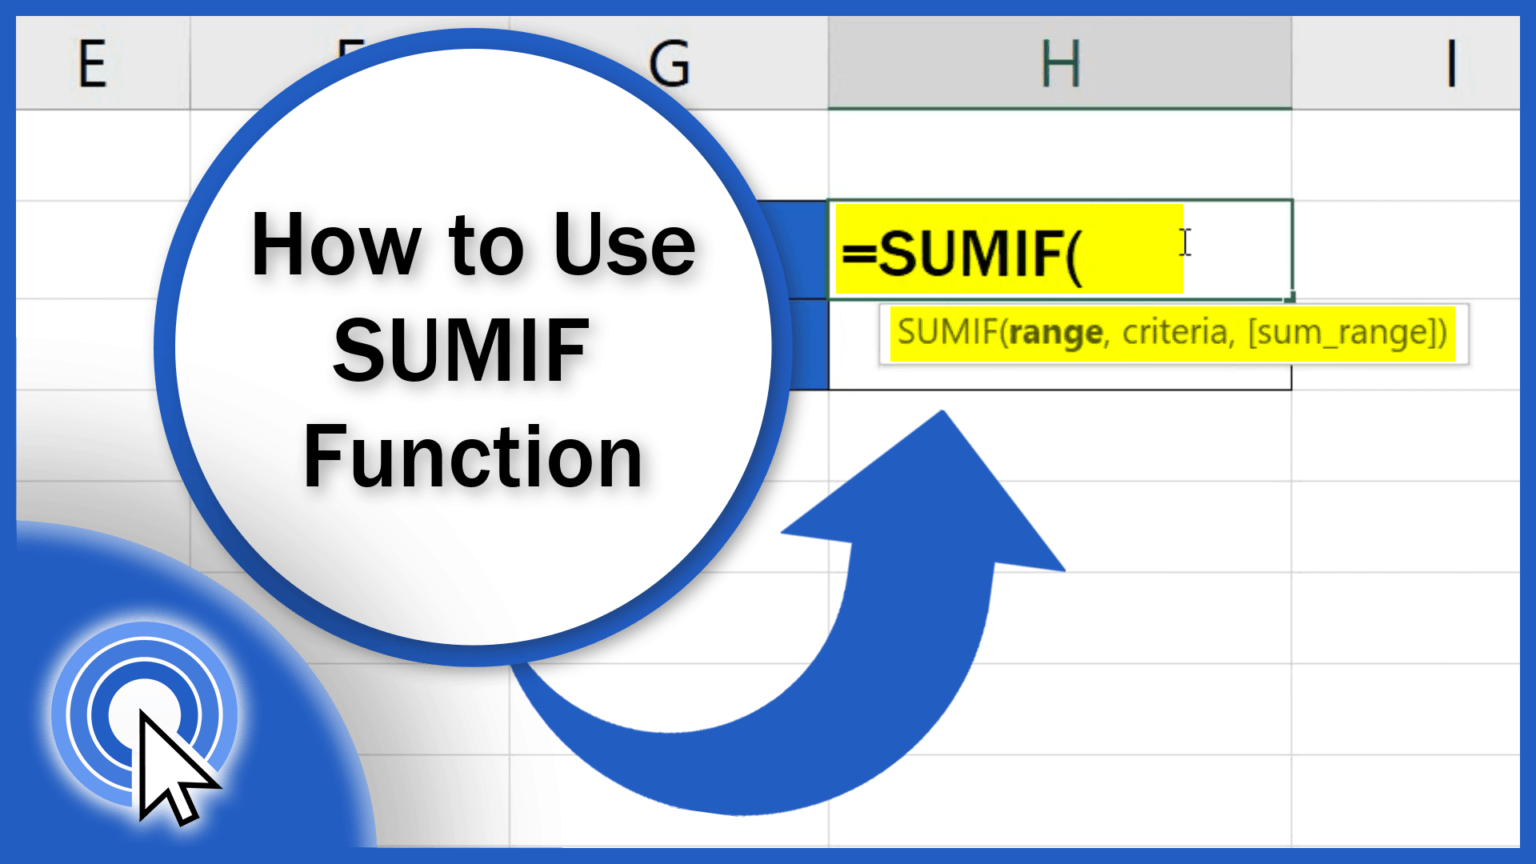 how-to-use-sumif-function-in-excel-step-by-step